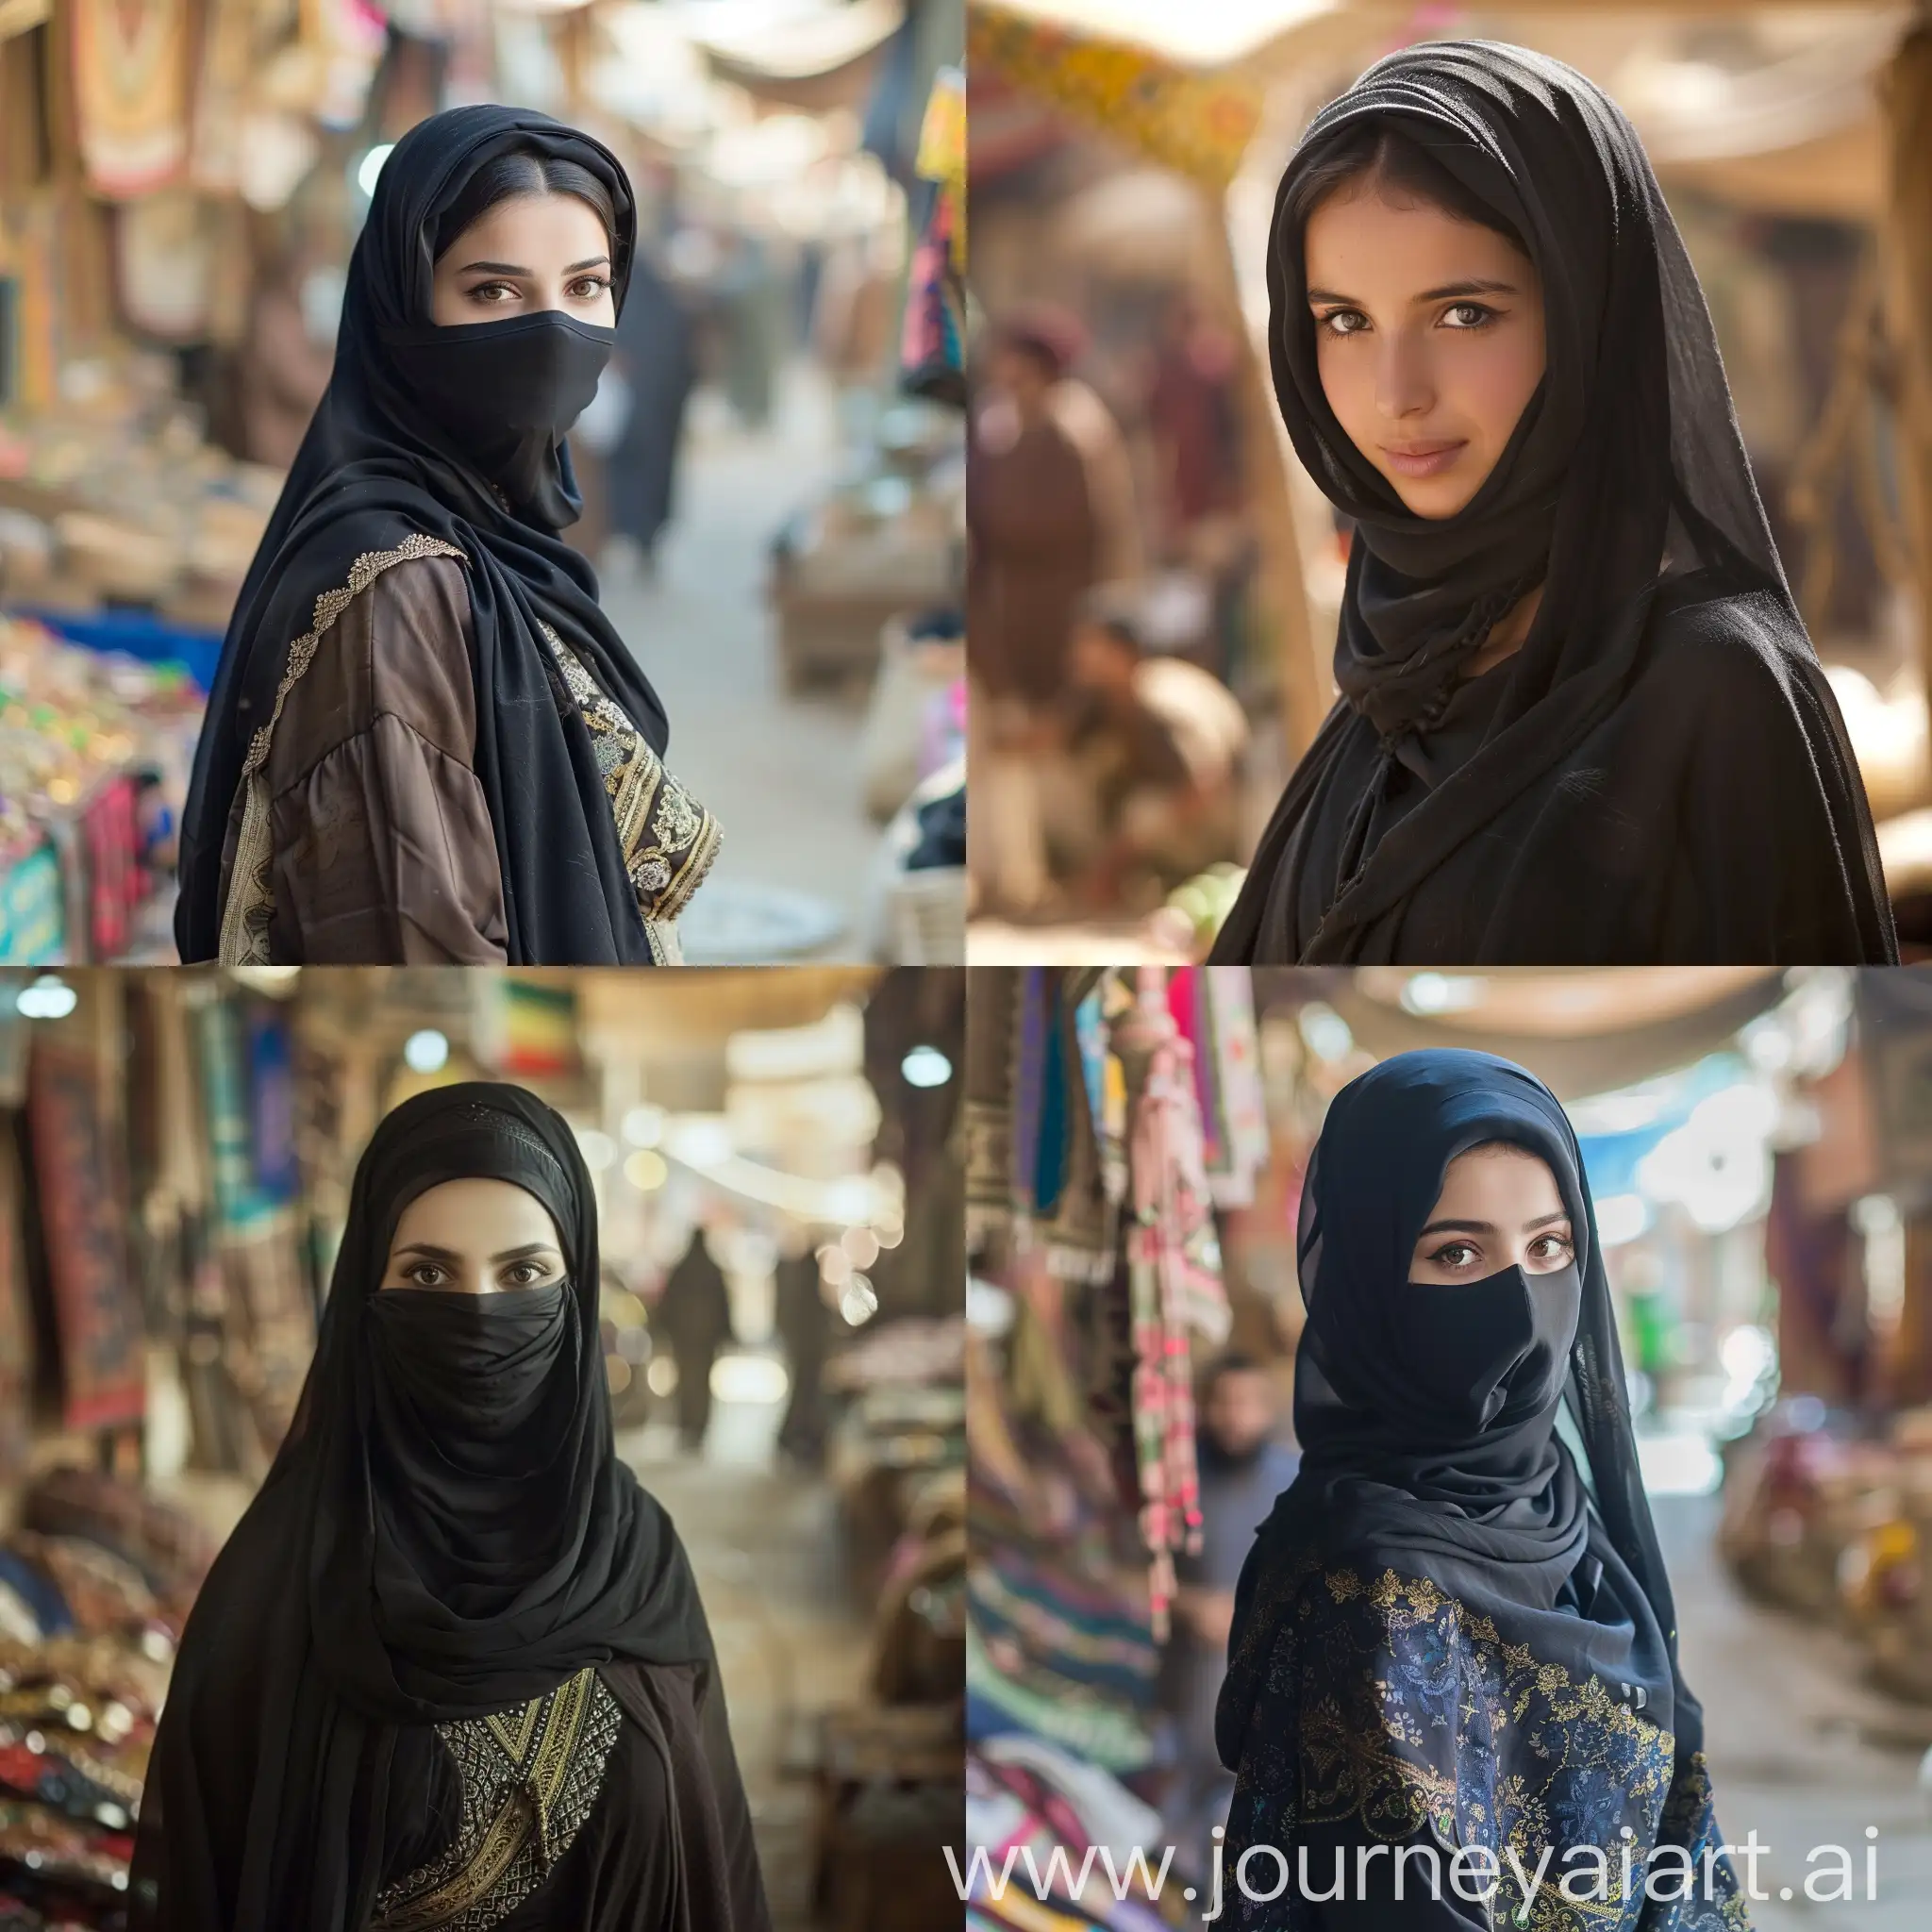 Elegant-8th-Century-Iranian-Woman-in-Traditional-Niqab-at-Pars-Market